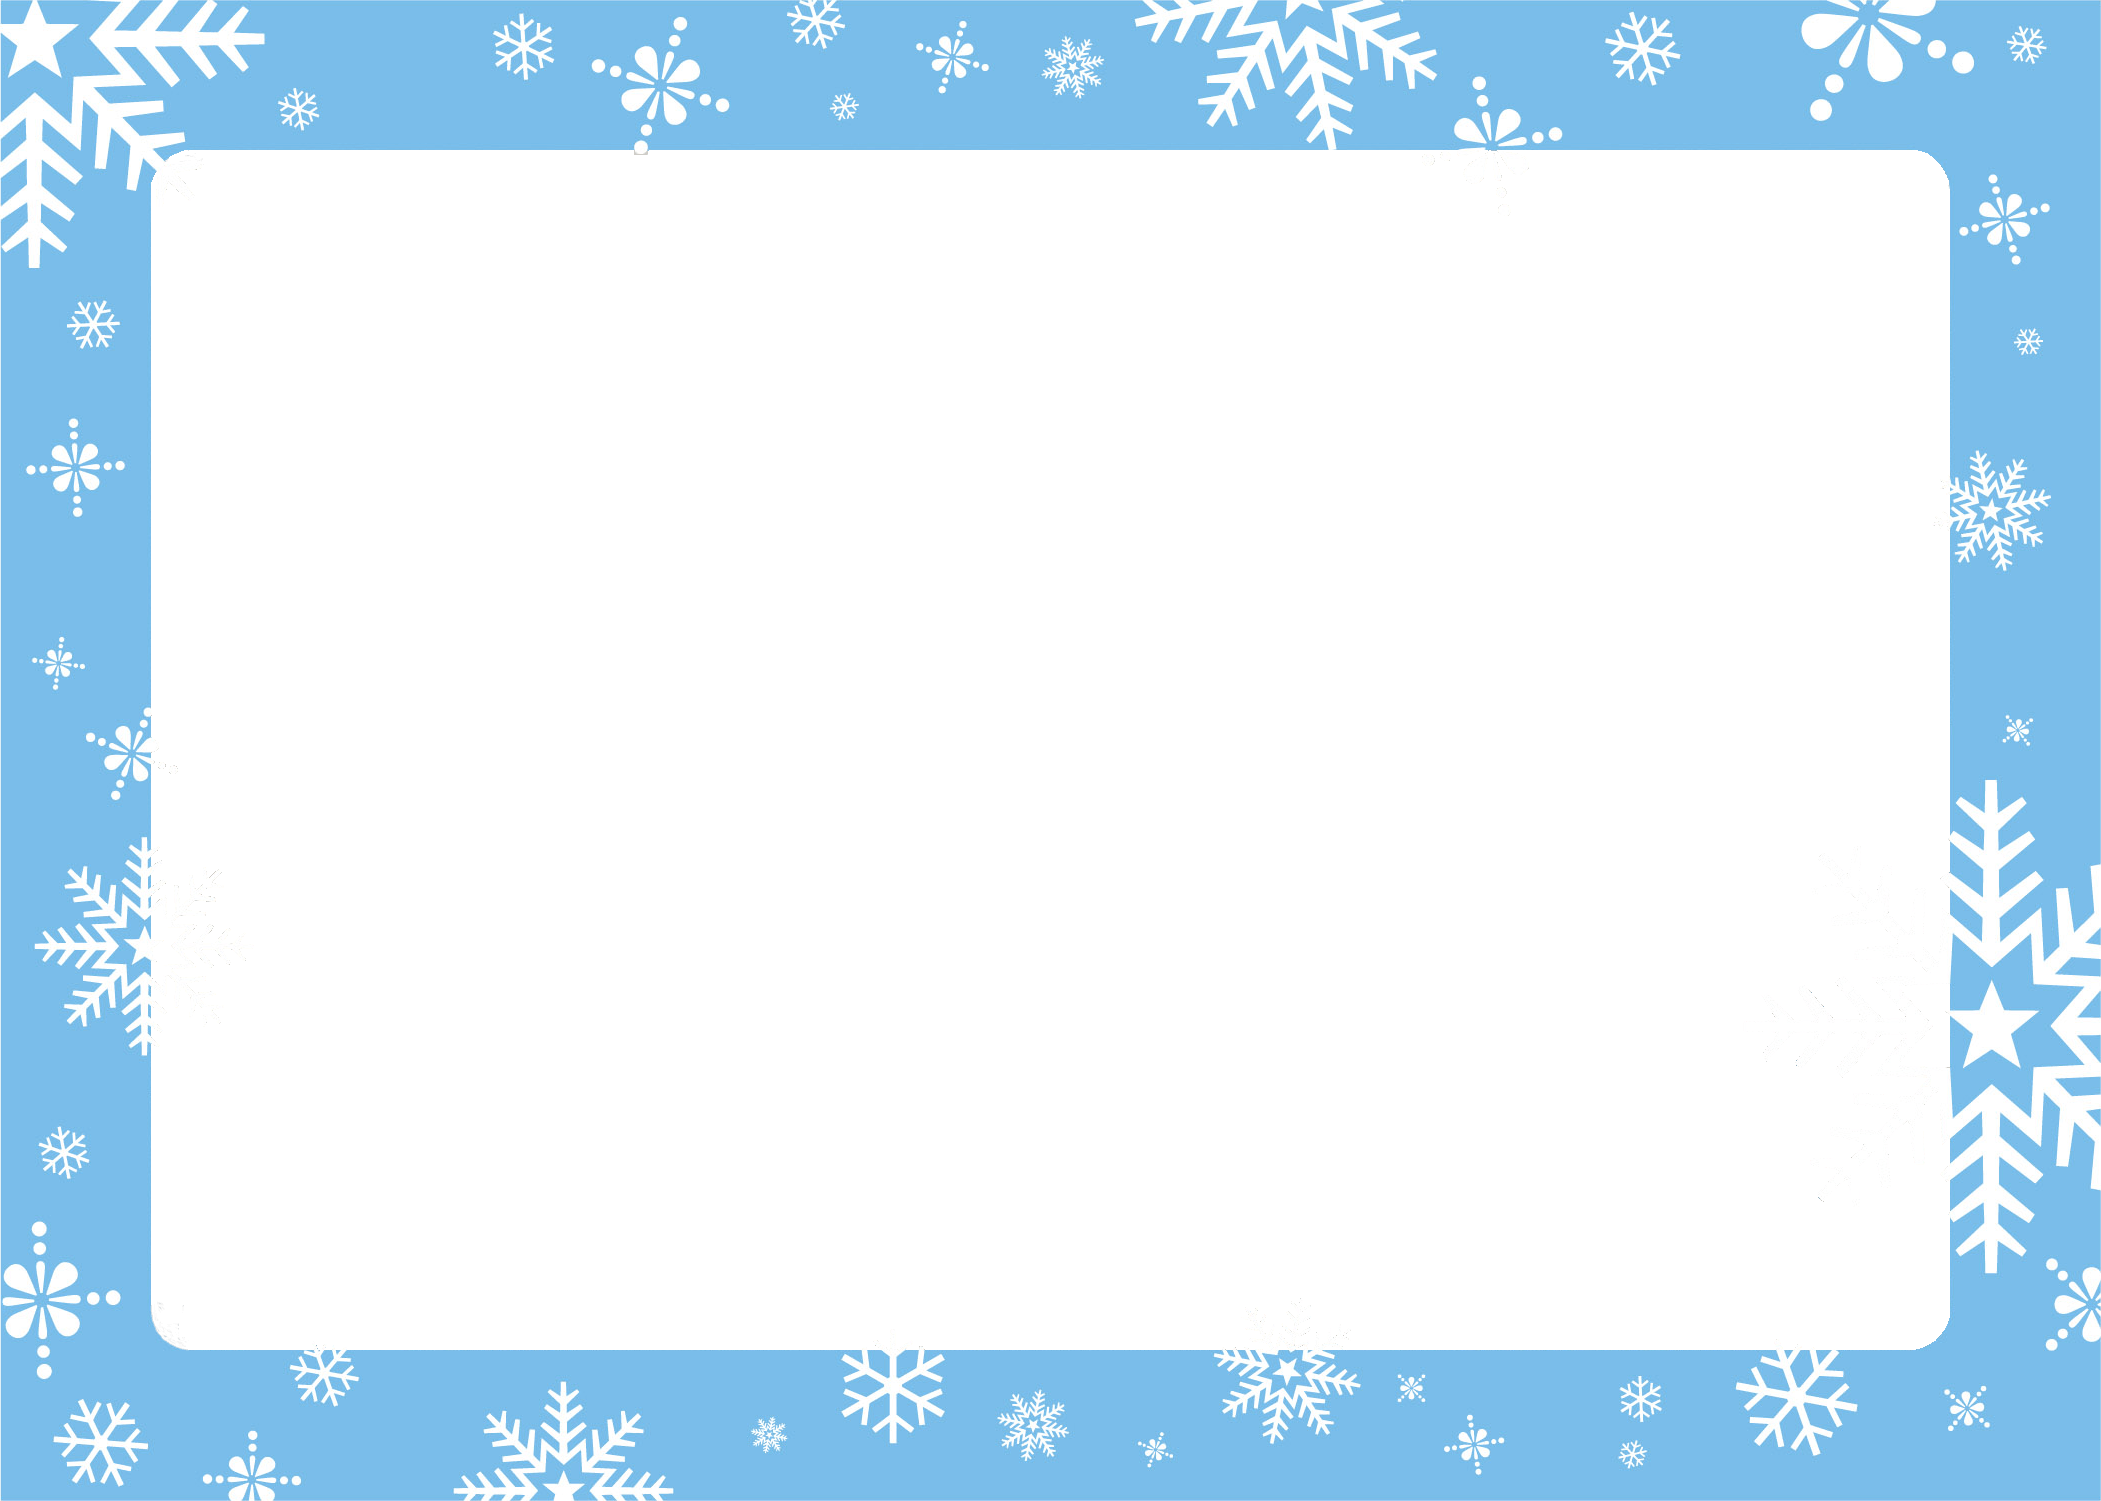 Winter clipart frame. Free border template certificate